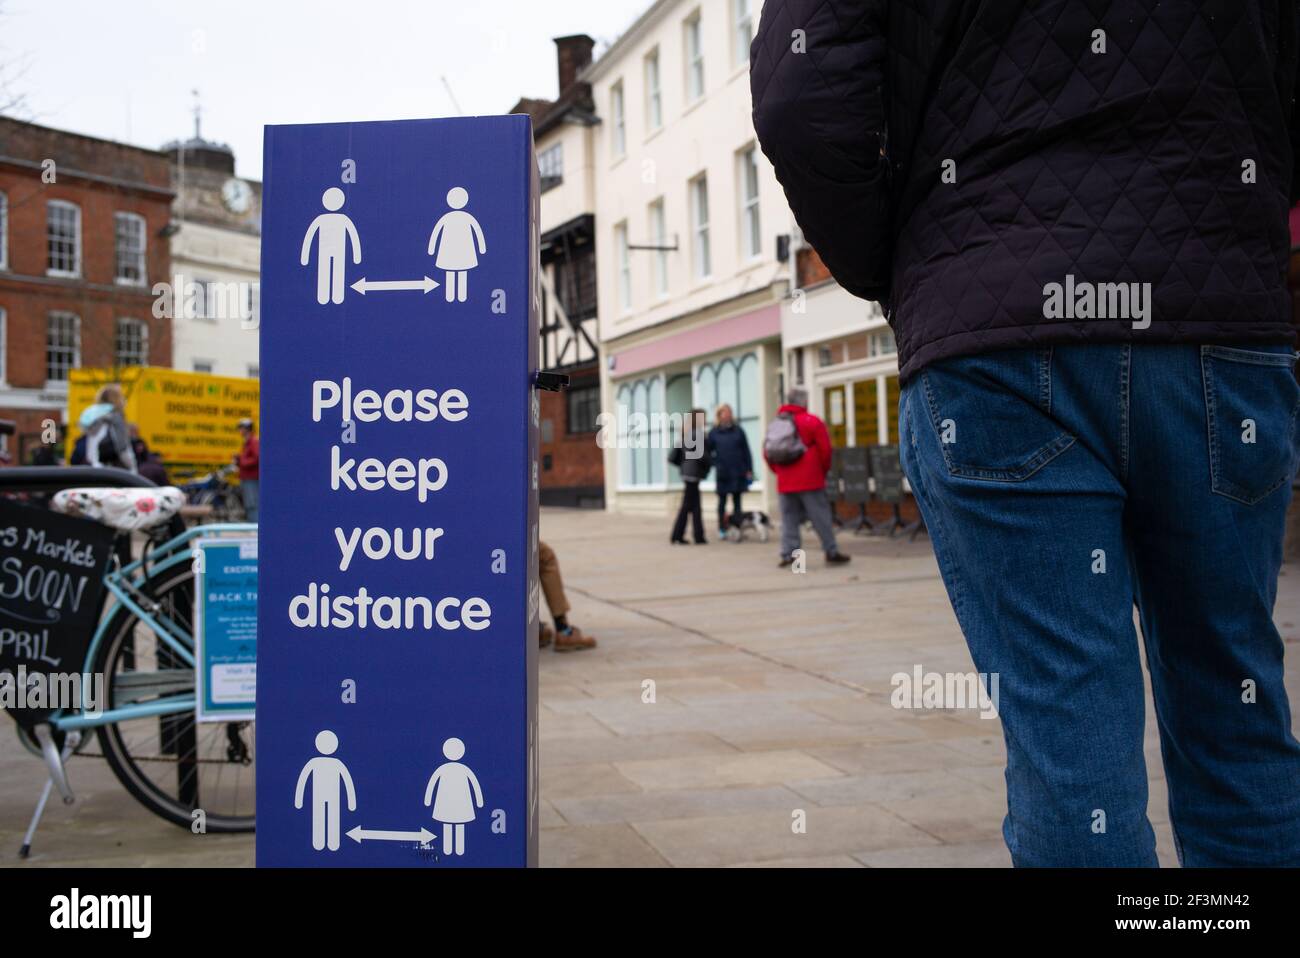 Social distancing keep your distance signs in the market town of Romsey Hampshire England and people meeting for coffee in the town square. Stock Photo